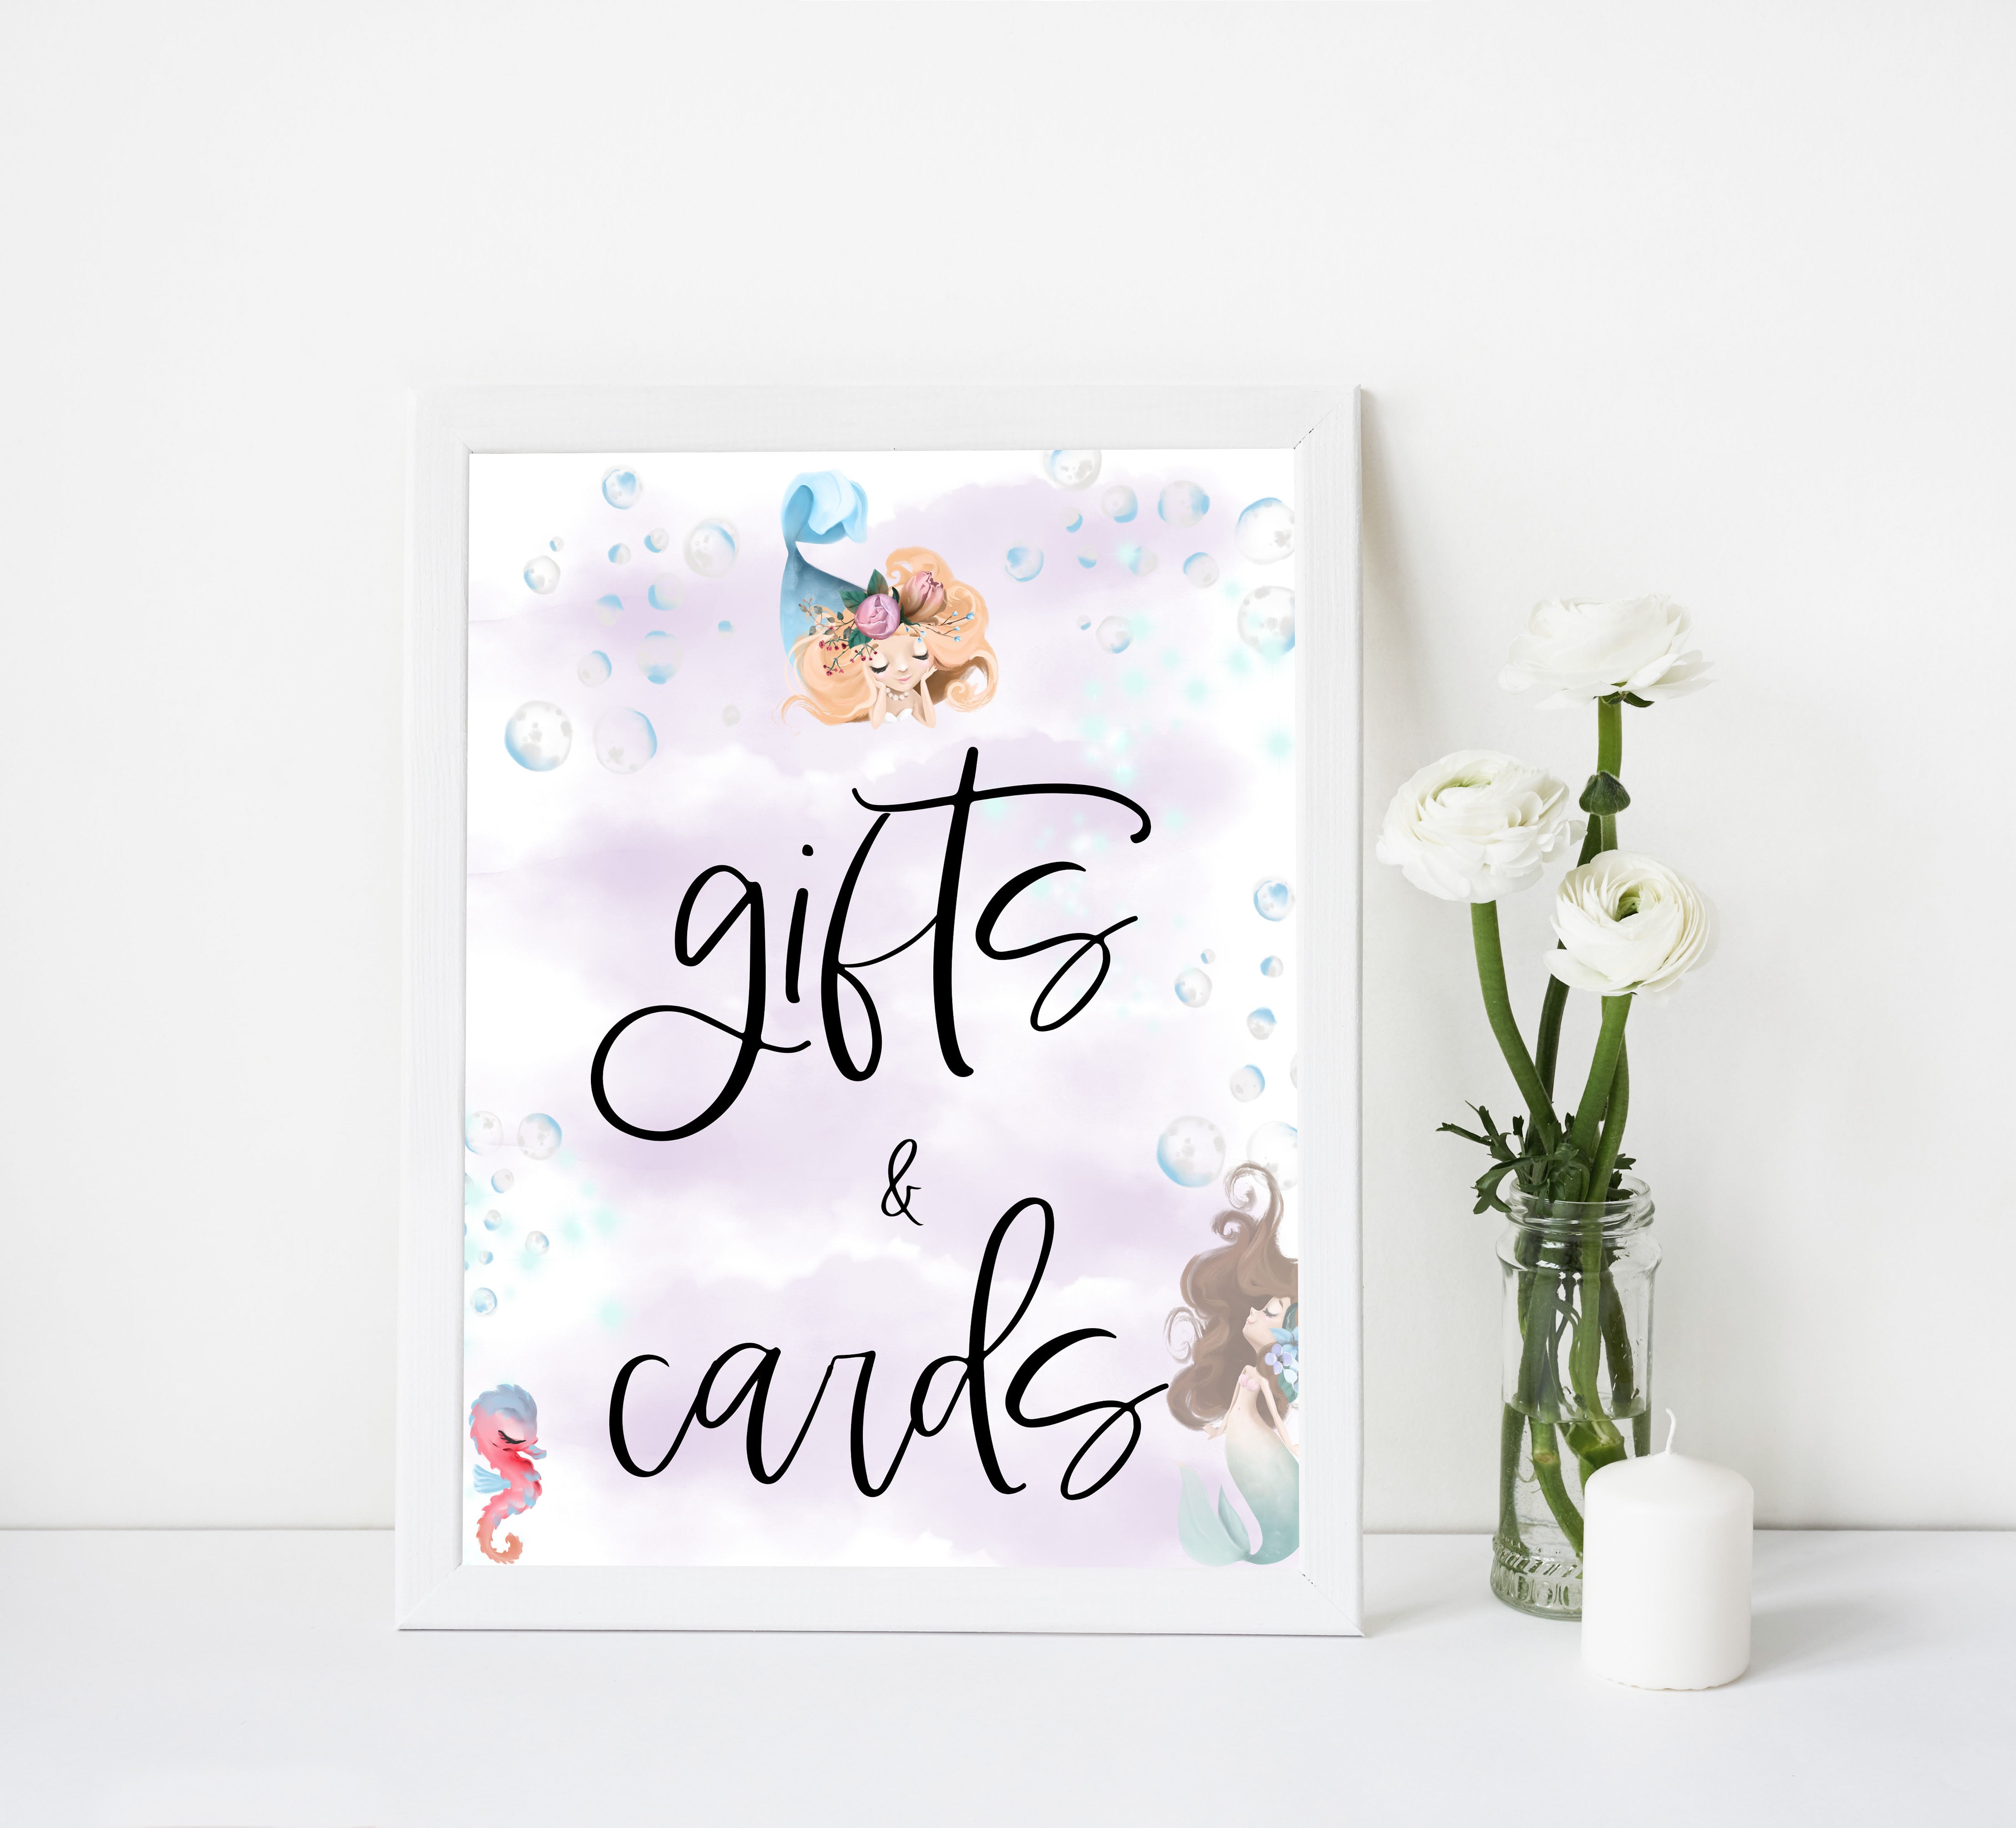 gifts and cards table sign, Little mermaid baby decor, printable baby table signs, printable baby decor, baby little mermaid table signs, fun baby signs, baby little mermaid fun baby table signs